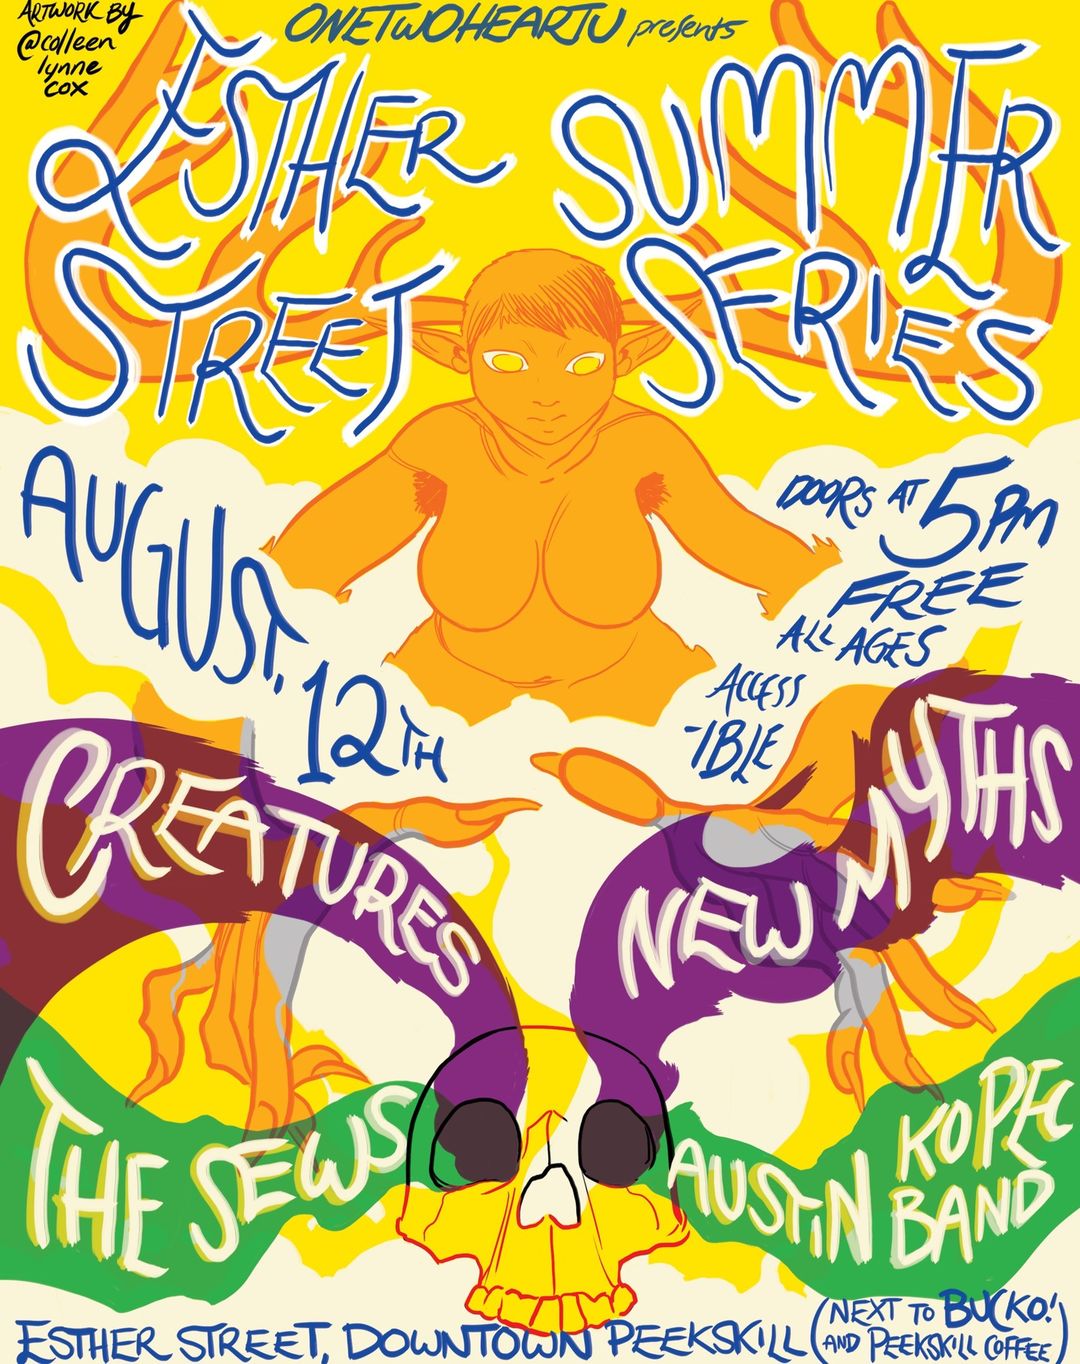 Illustrated flier for the Esther Street Summer Series.